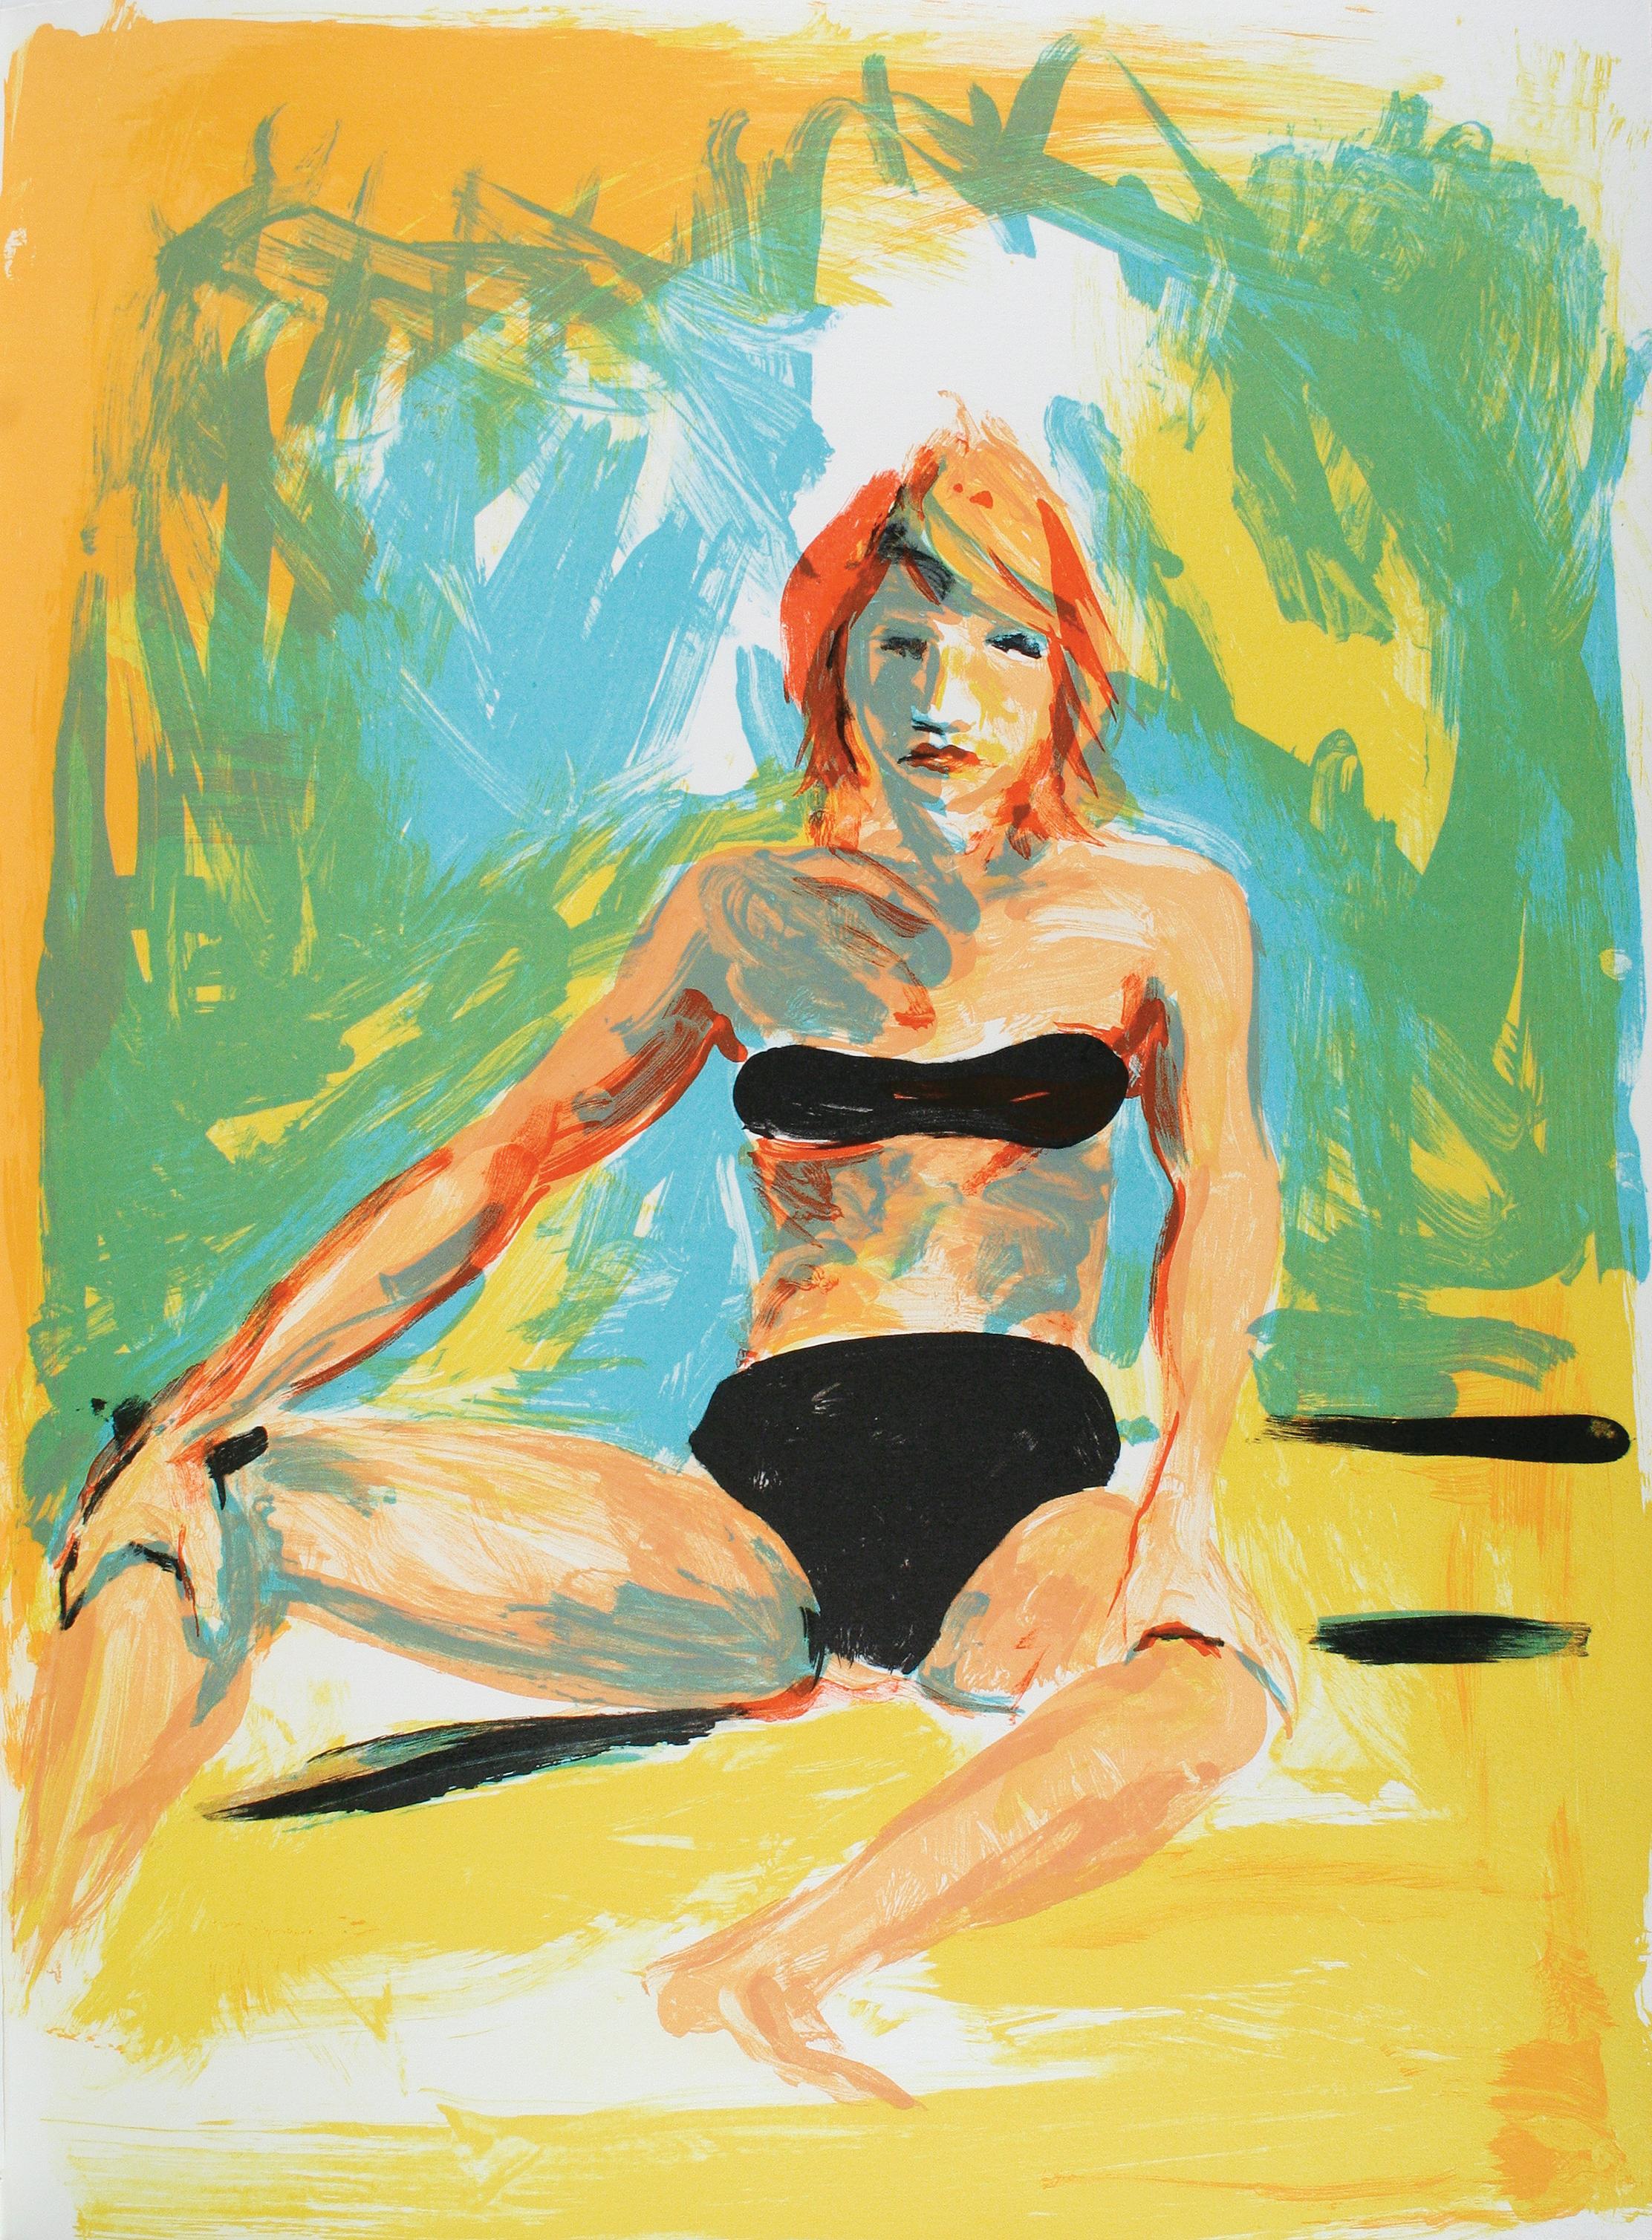 Annie, Gwen, Lilly, Pam and Tulip by Jamaica Kincaid - Art by Eric Fischl